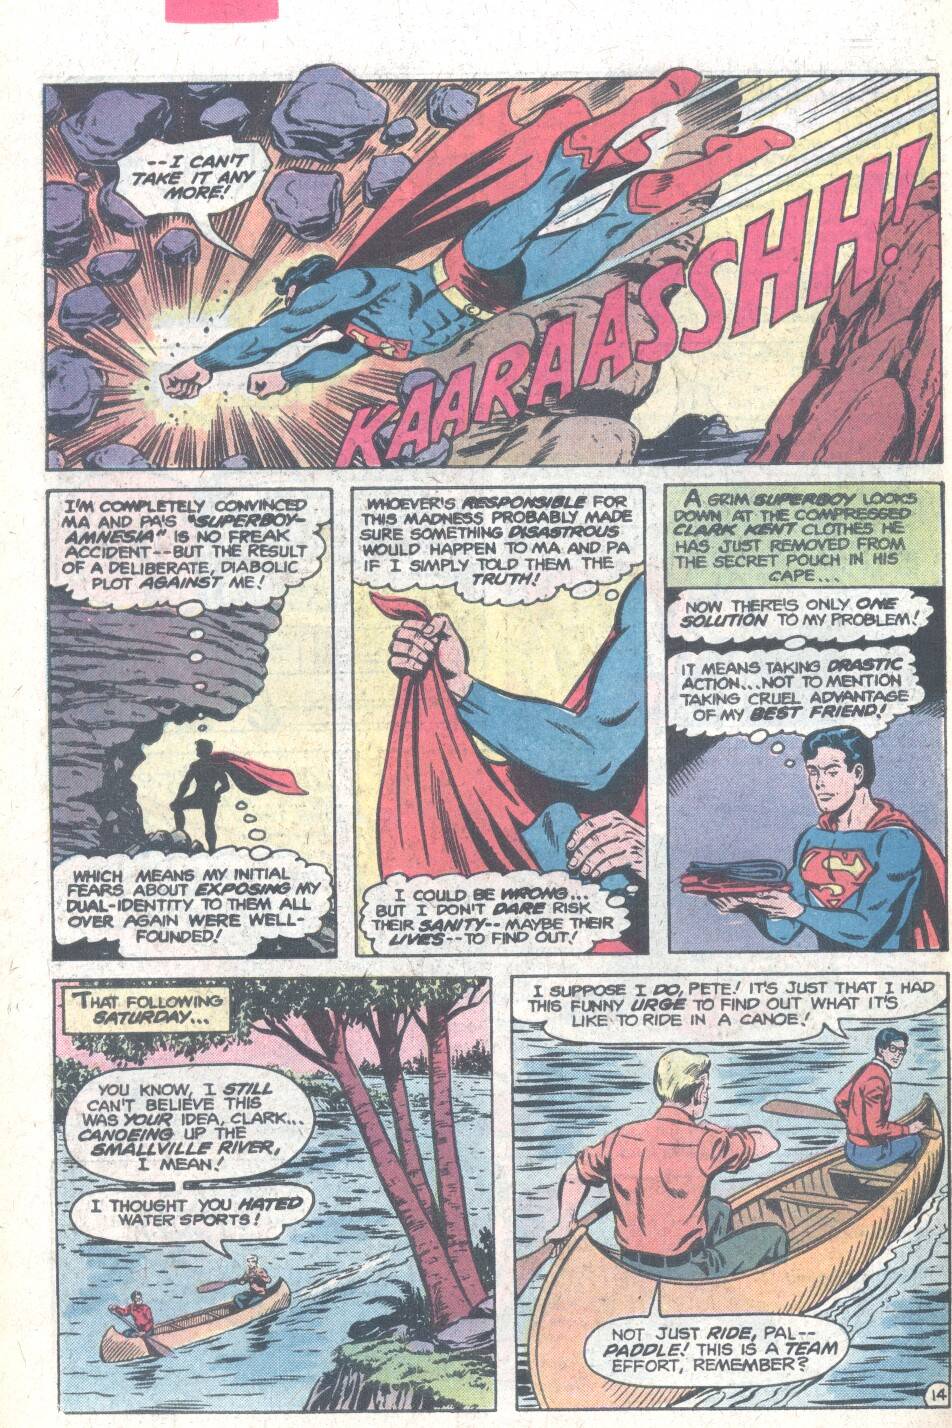 The New Adventures of Superboy 8 Page 14